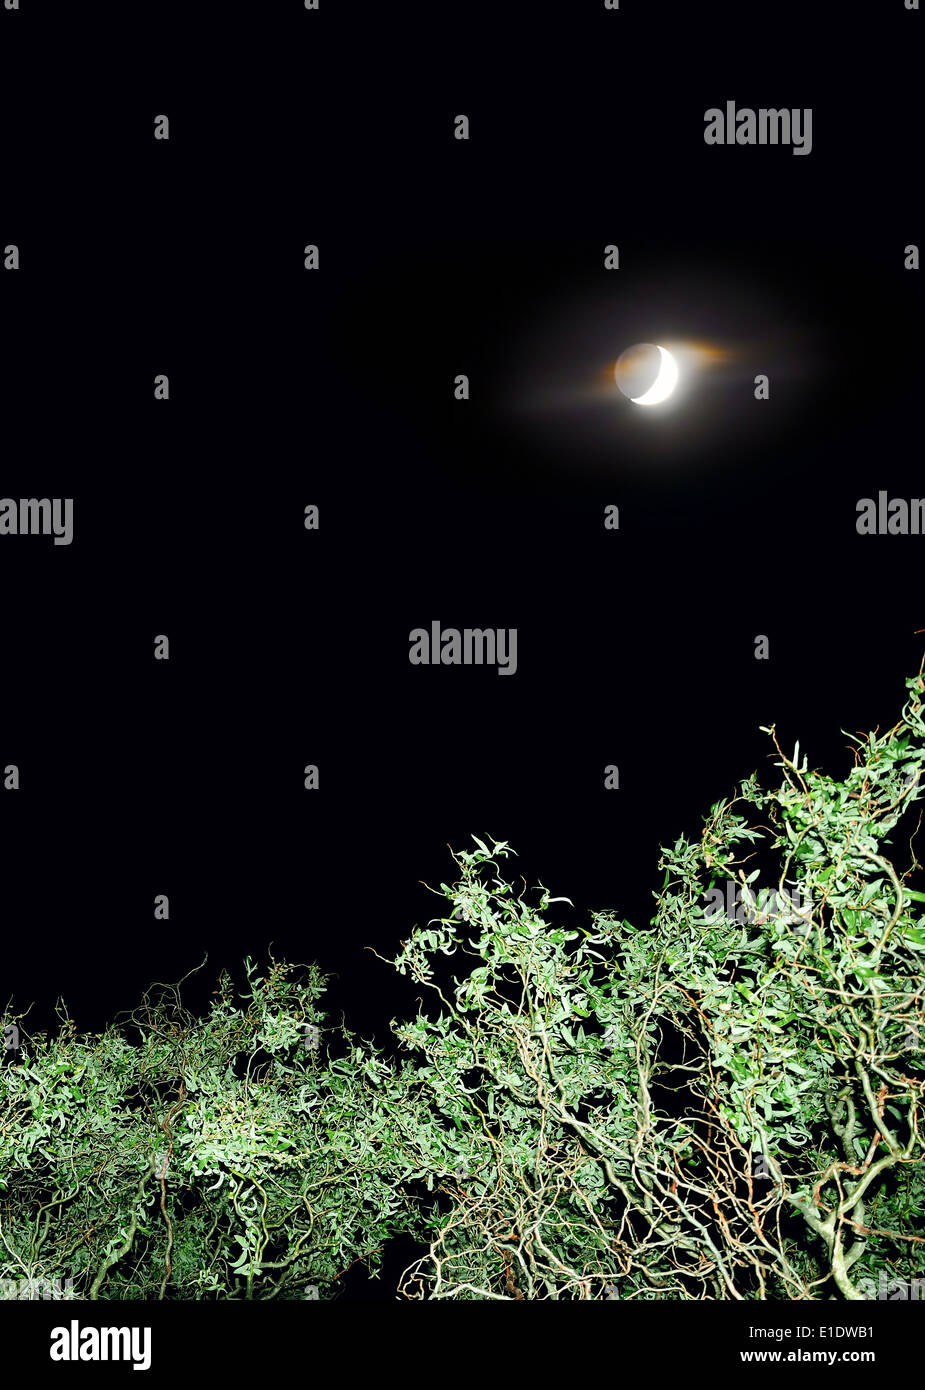 Overhead shot of a nightly sky with moon and curly branches Stock Photo